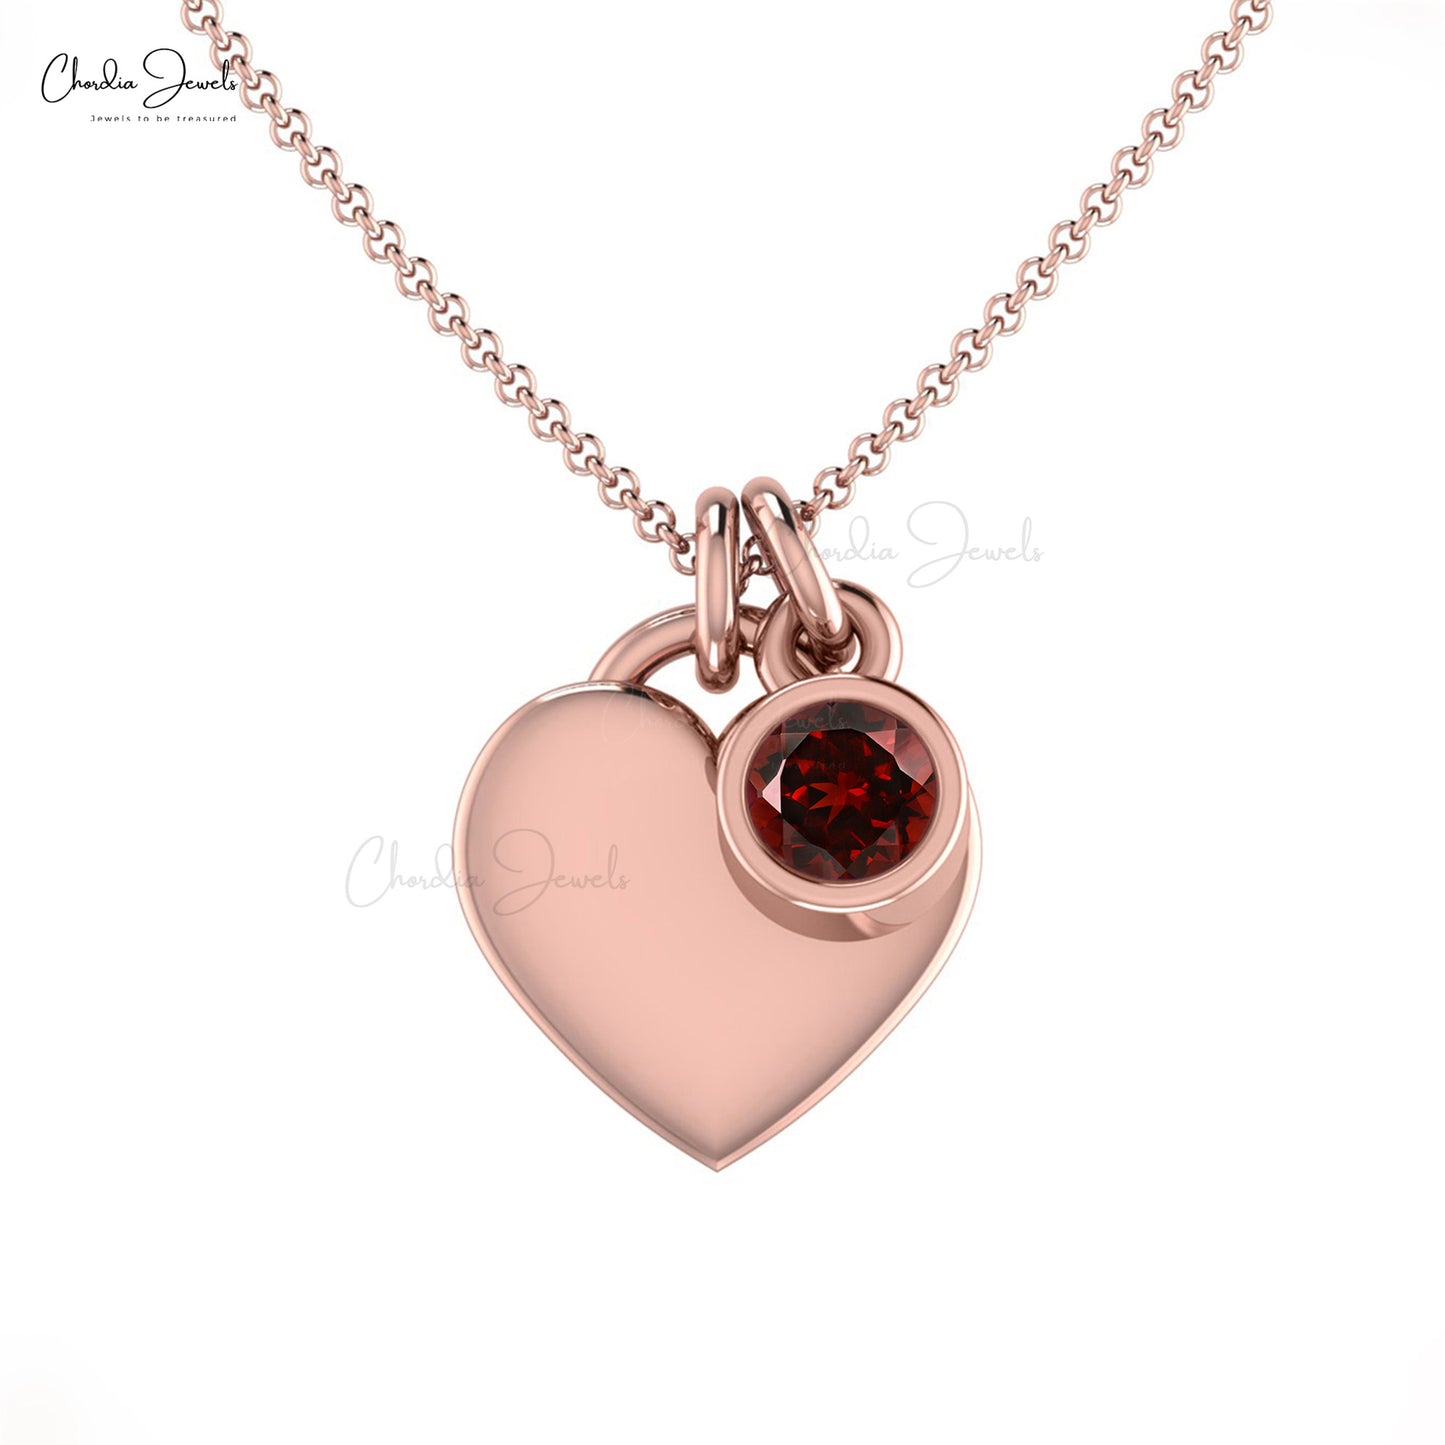 Load image into Gallery viewer, Solid 14k Gold Heart Charm Necklace with Bezel Set Solitaire Garnet
